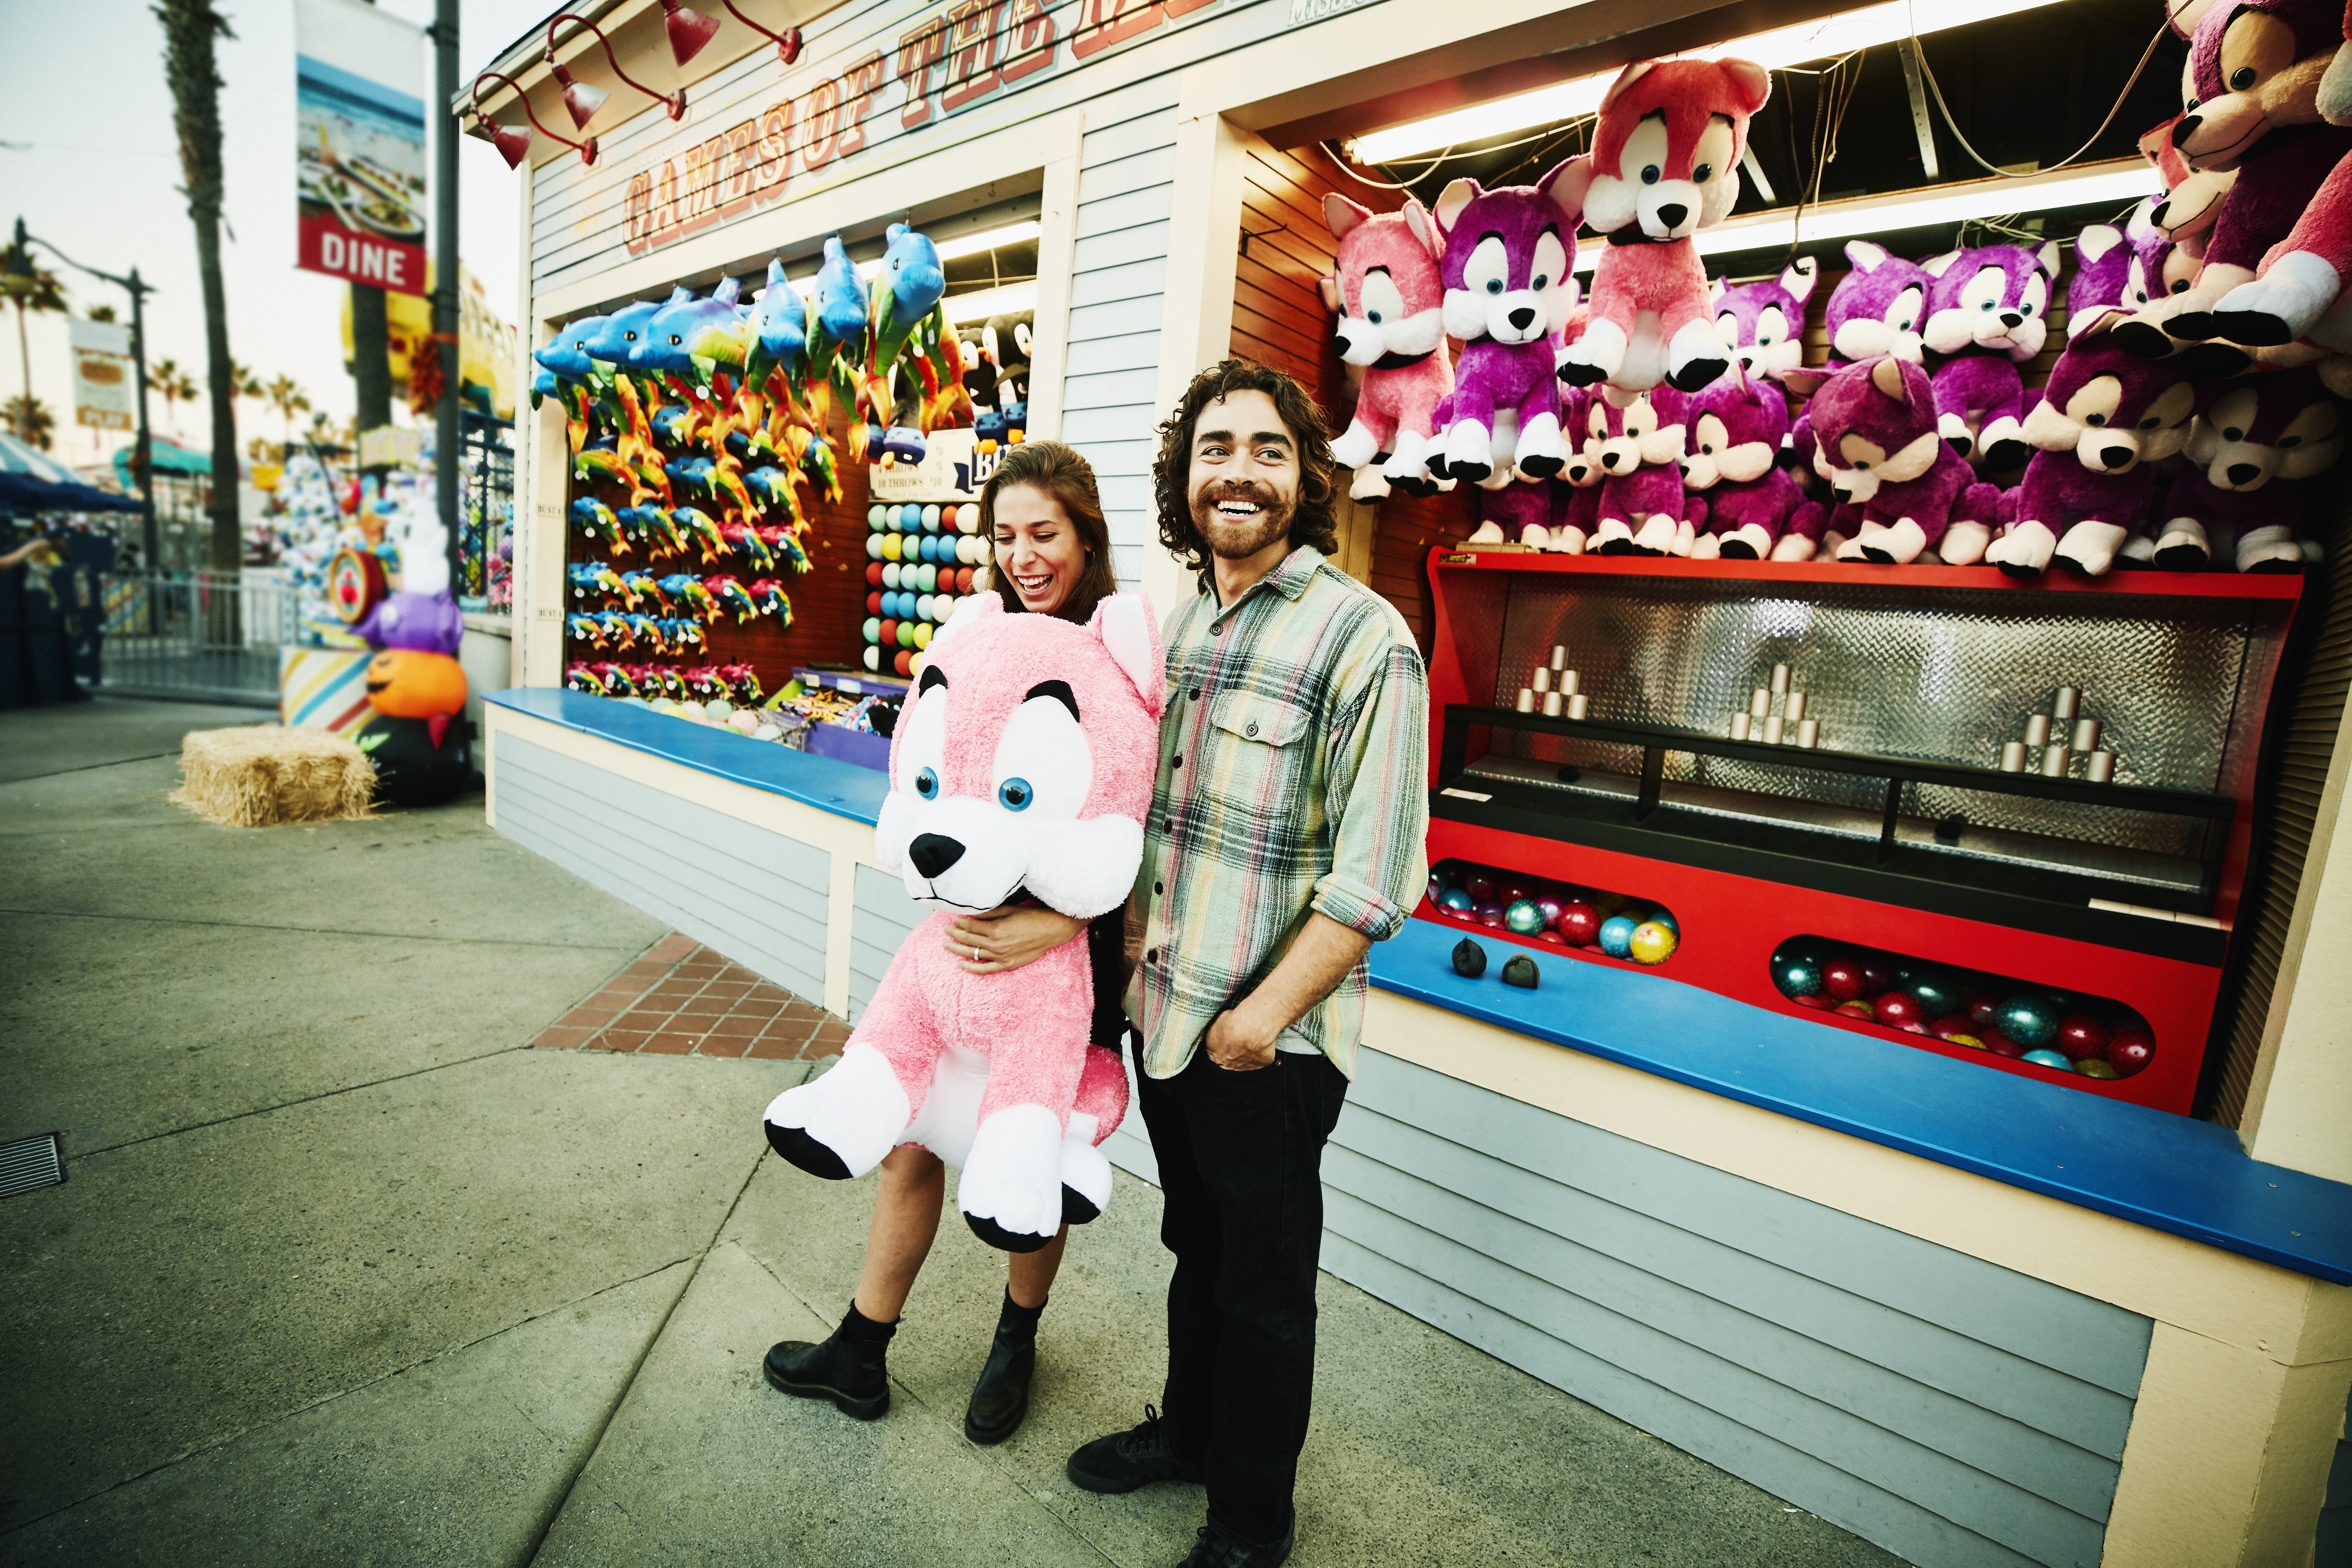 A smiling couple holding stuffed animal after winning carnival game at an amusement park | Source: Getty Images